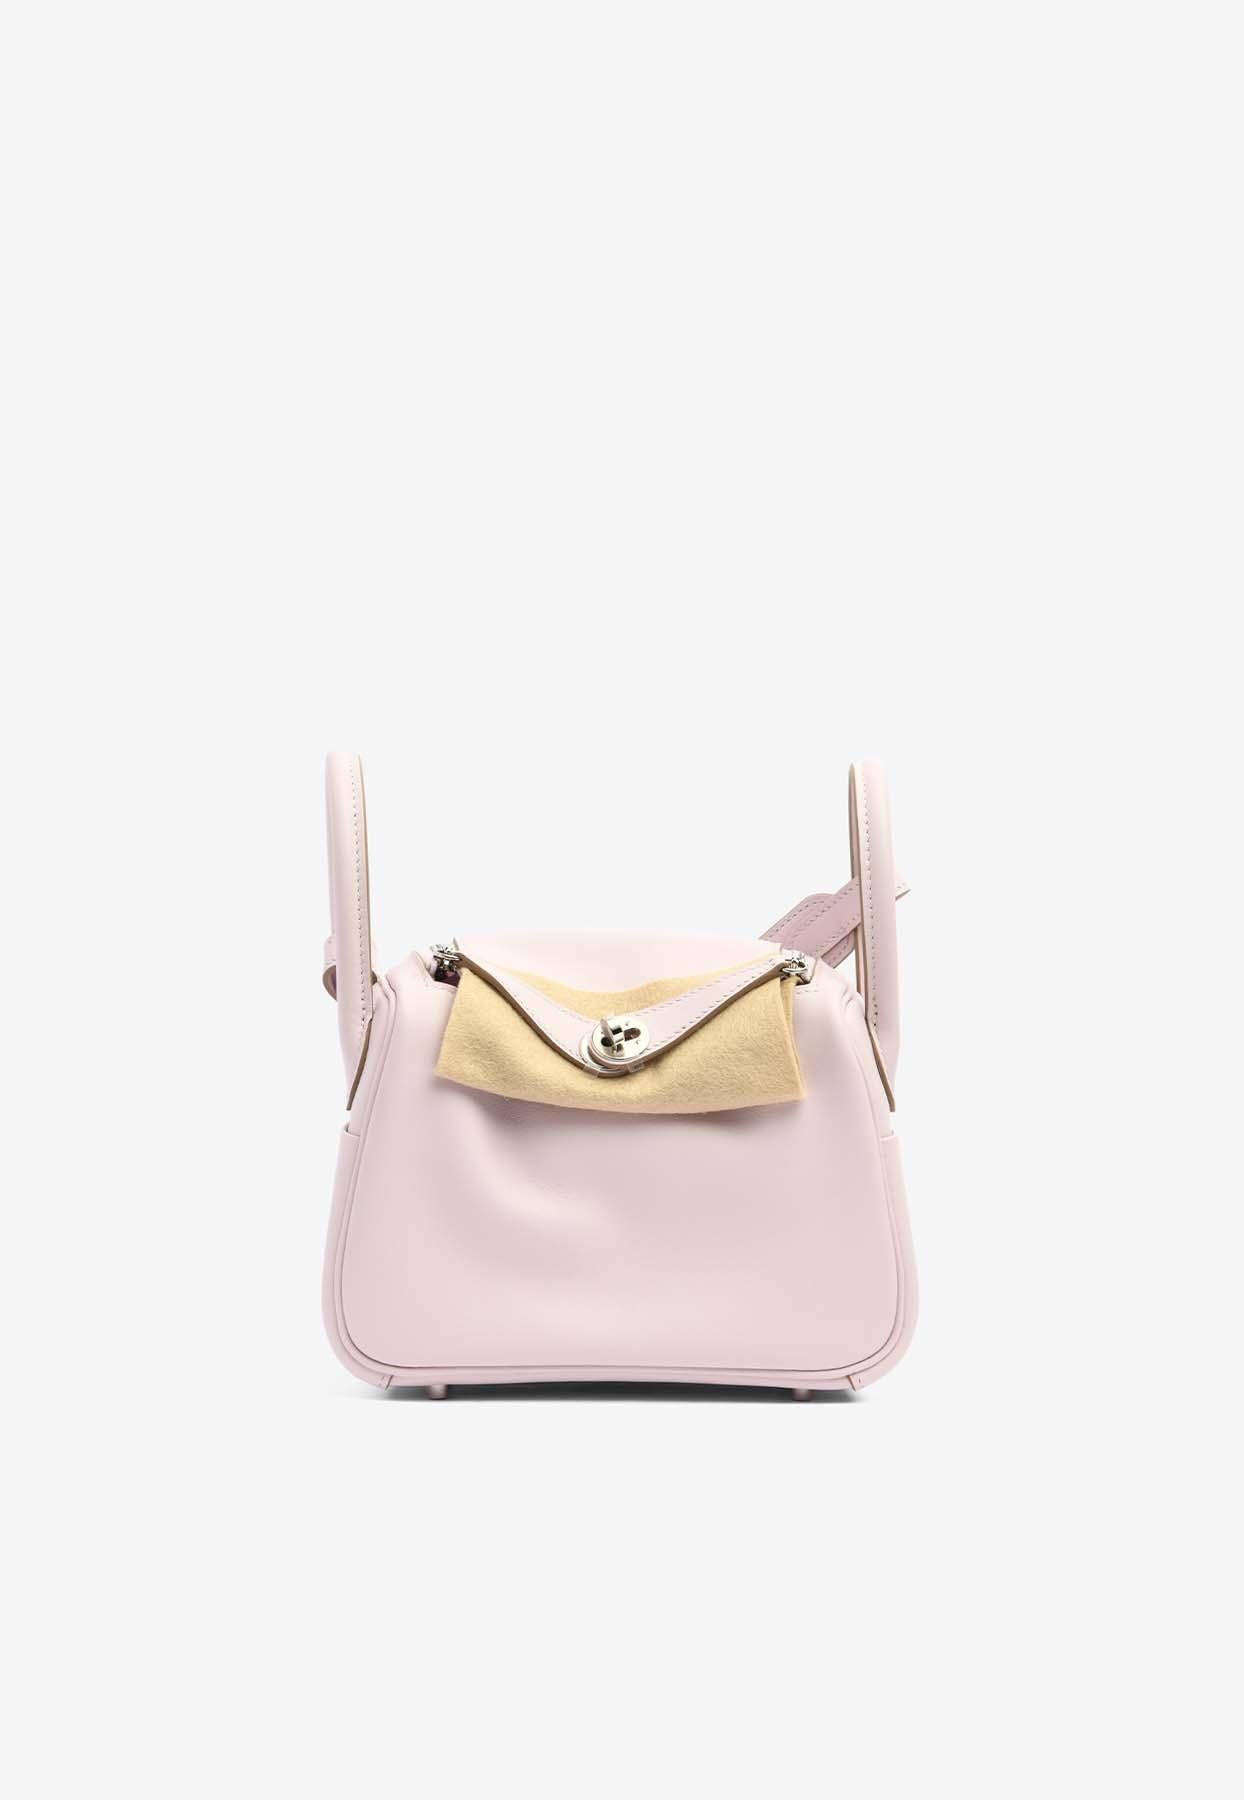 Mini Lindy 20 Verso in Mauve Pale and Gold Swift Leather in Palladium Hardware For Sale 1